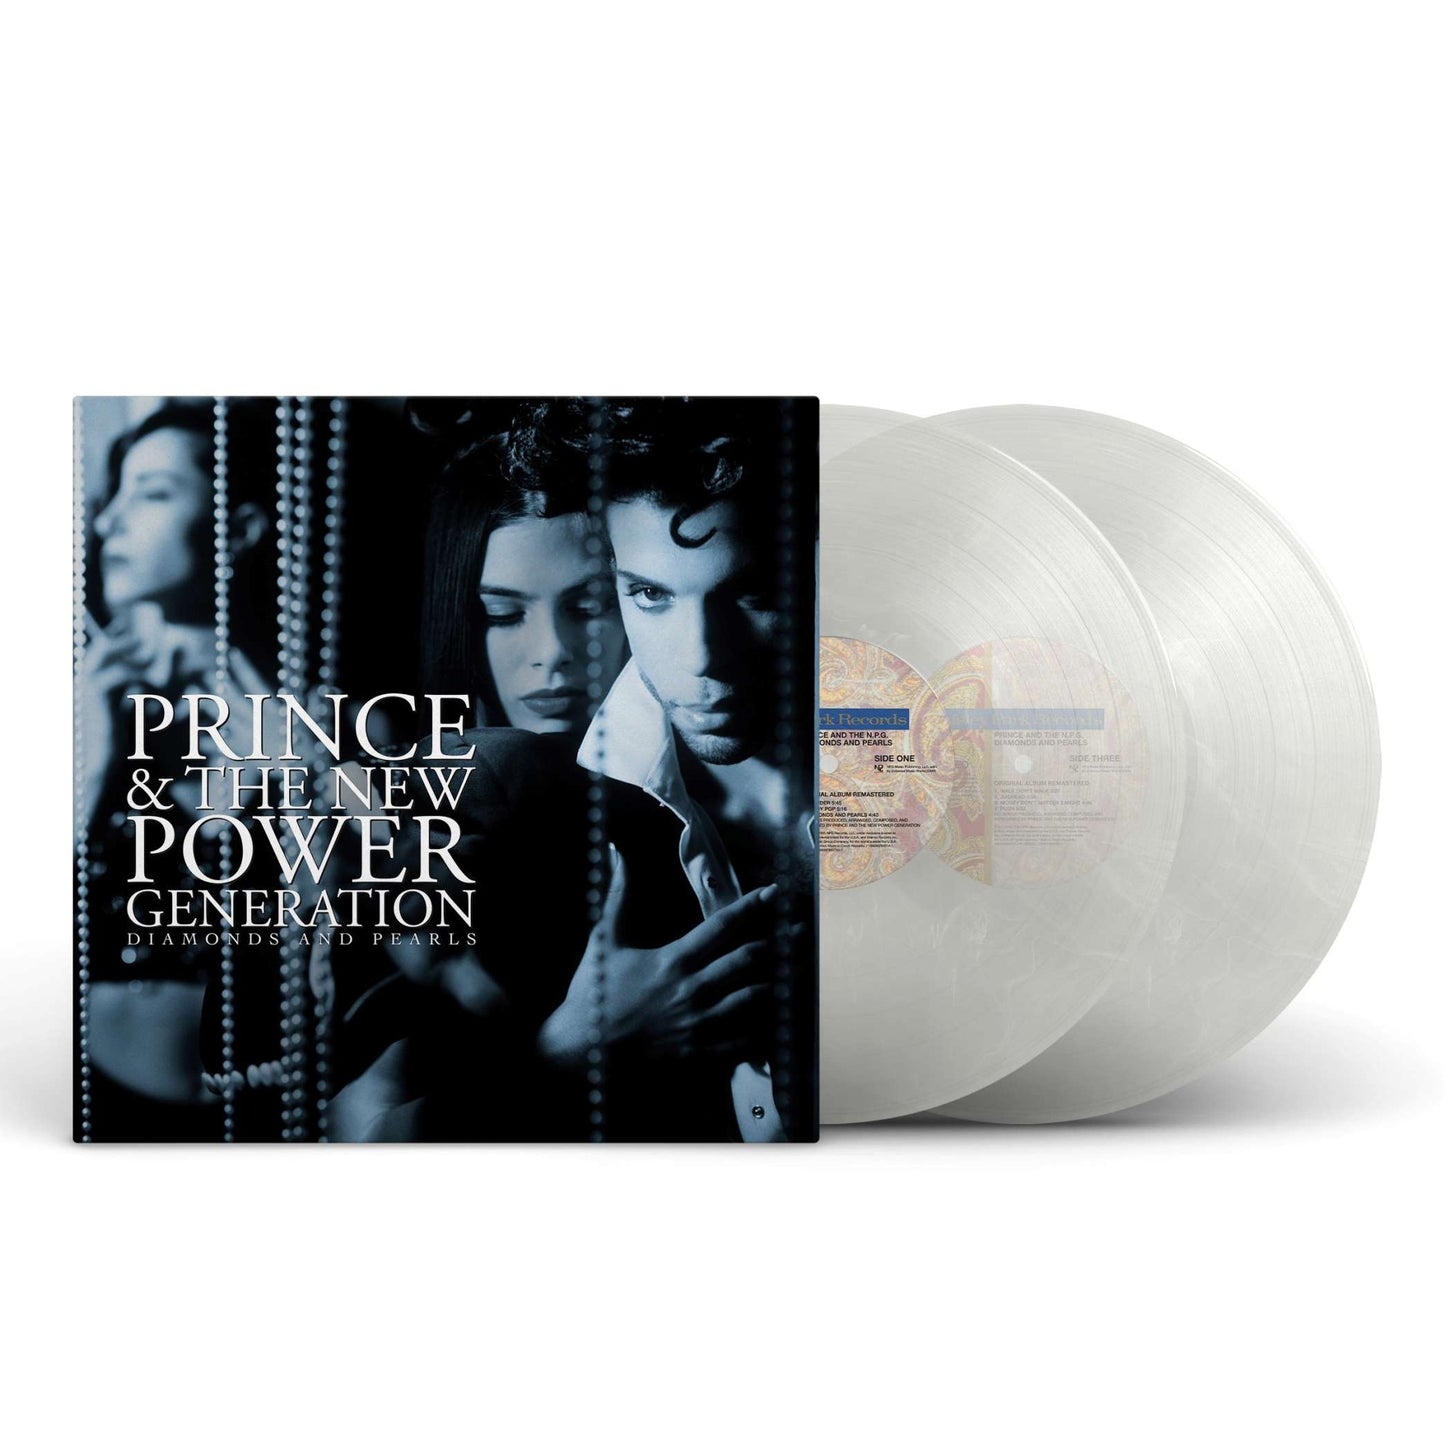 Prince & The New Power Generation: Diamonds And Pearls (remastered) (180g) (Limited Edition) (Clear »Diamond« Vinyl) 2lps